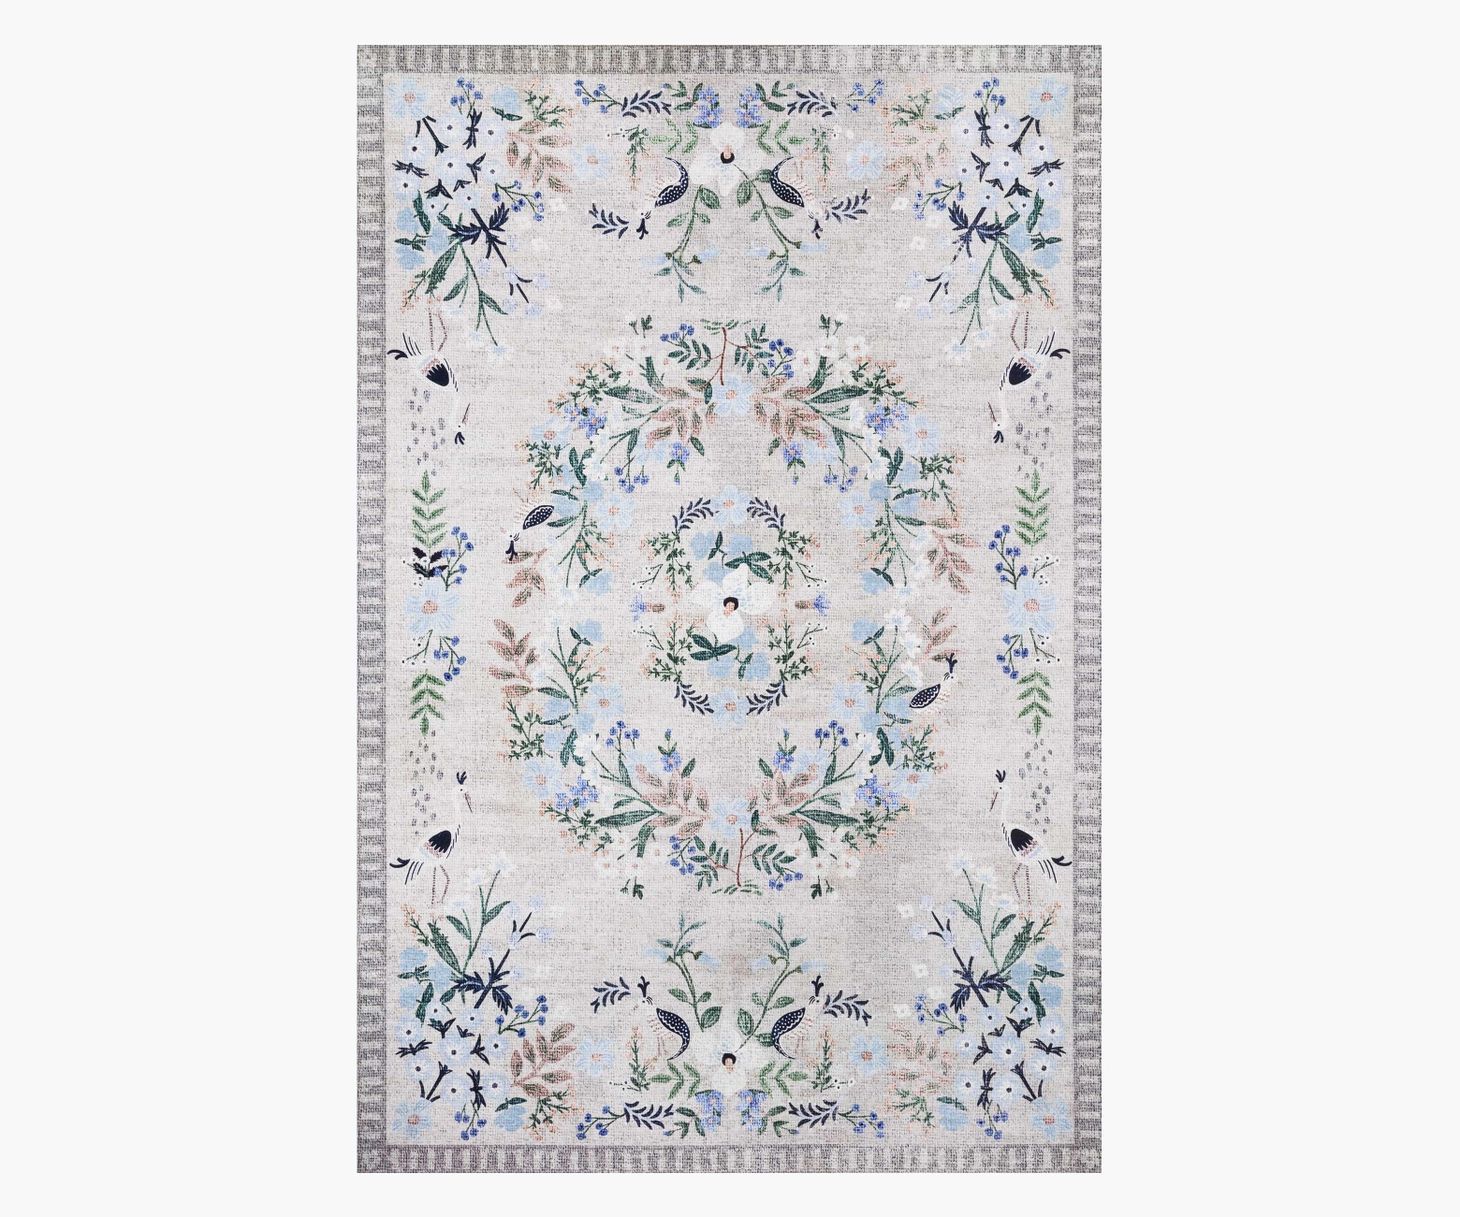 Palais Luxembourg Stone Printed Rug | Rifle Paper Co.